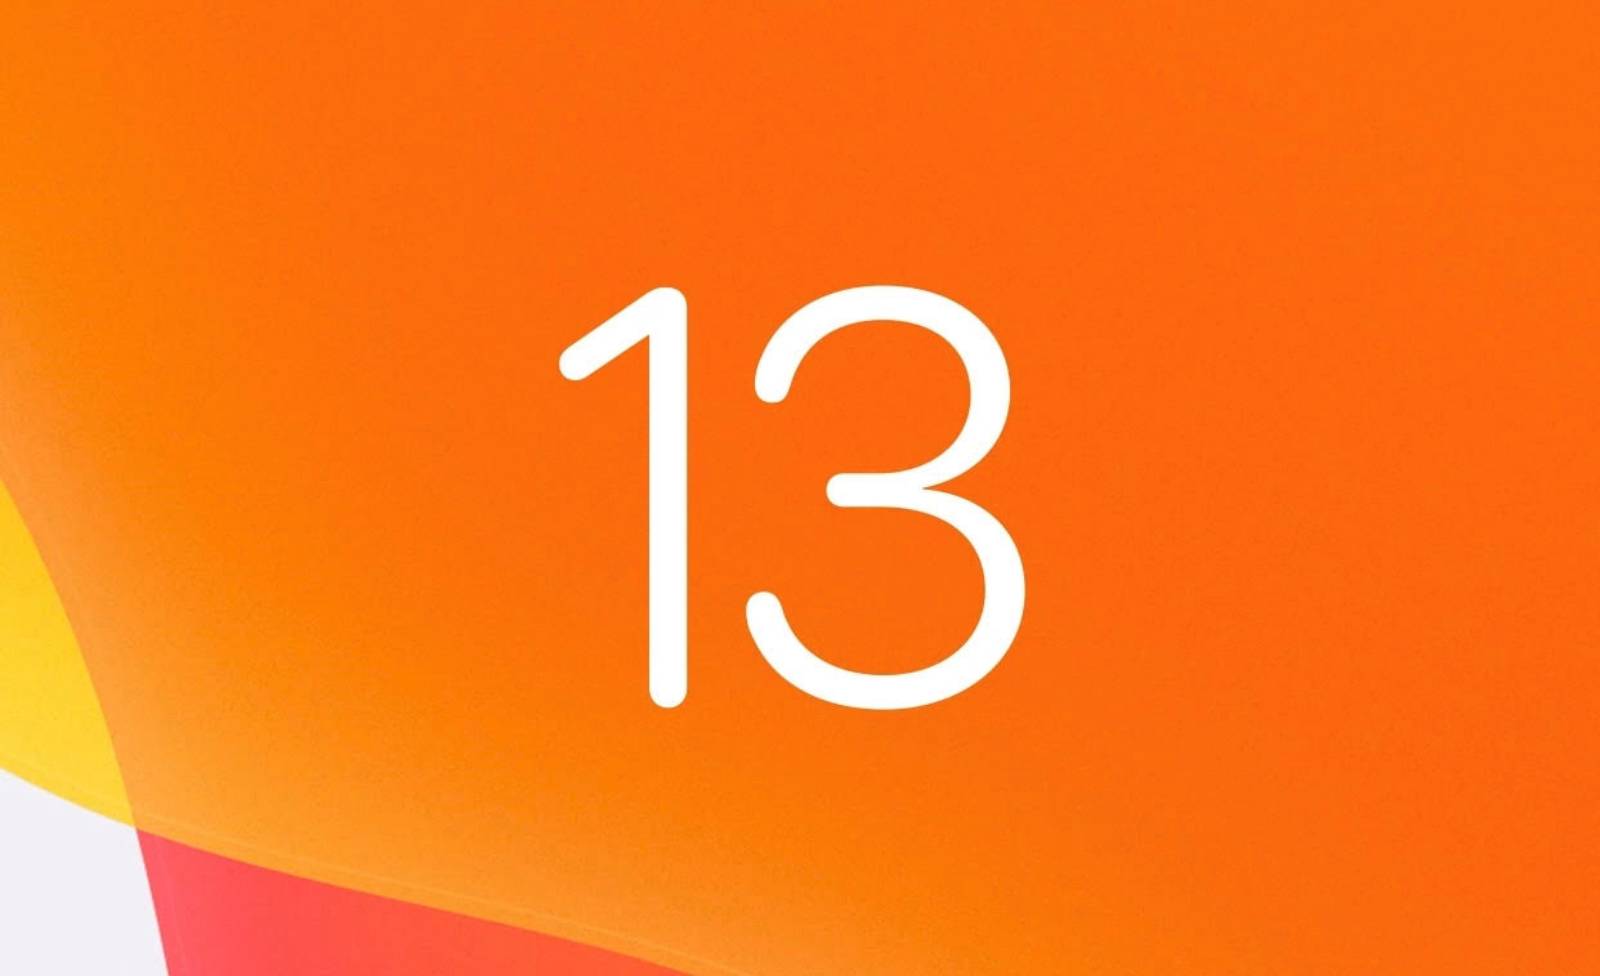 iOS 13 has very BIG PROBLEMS that will be FIXED tomorrow